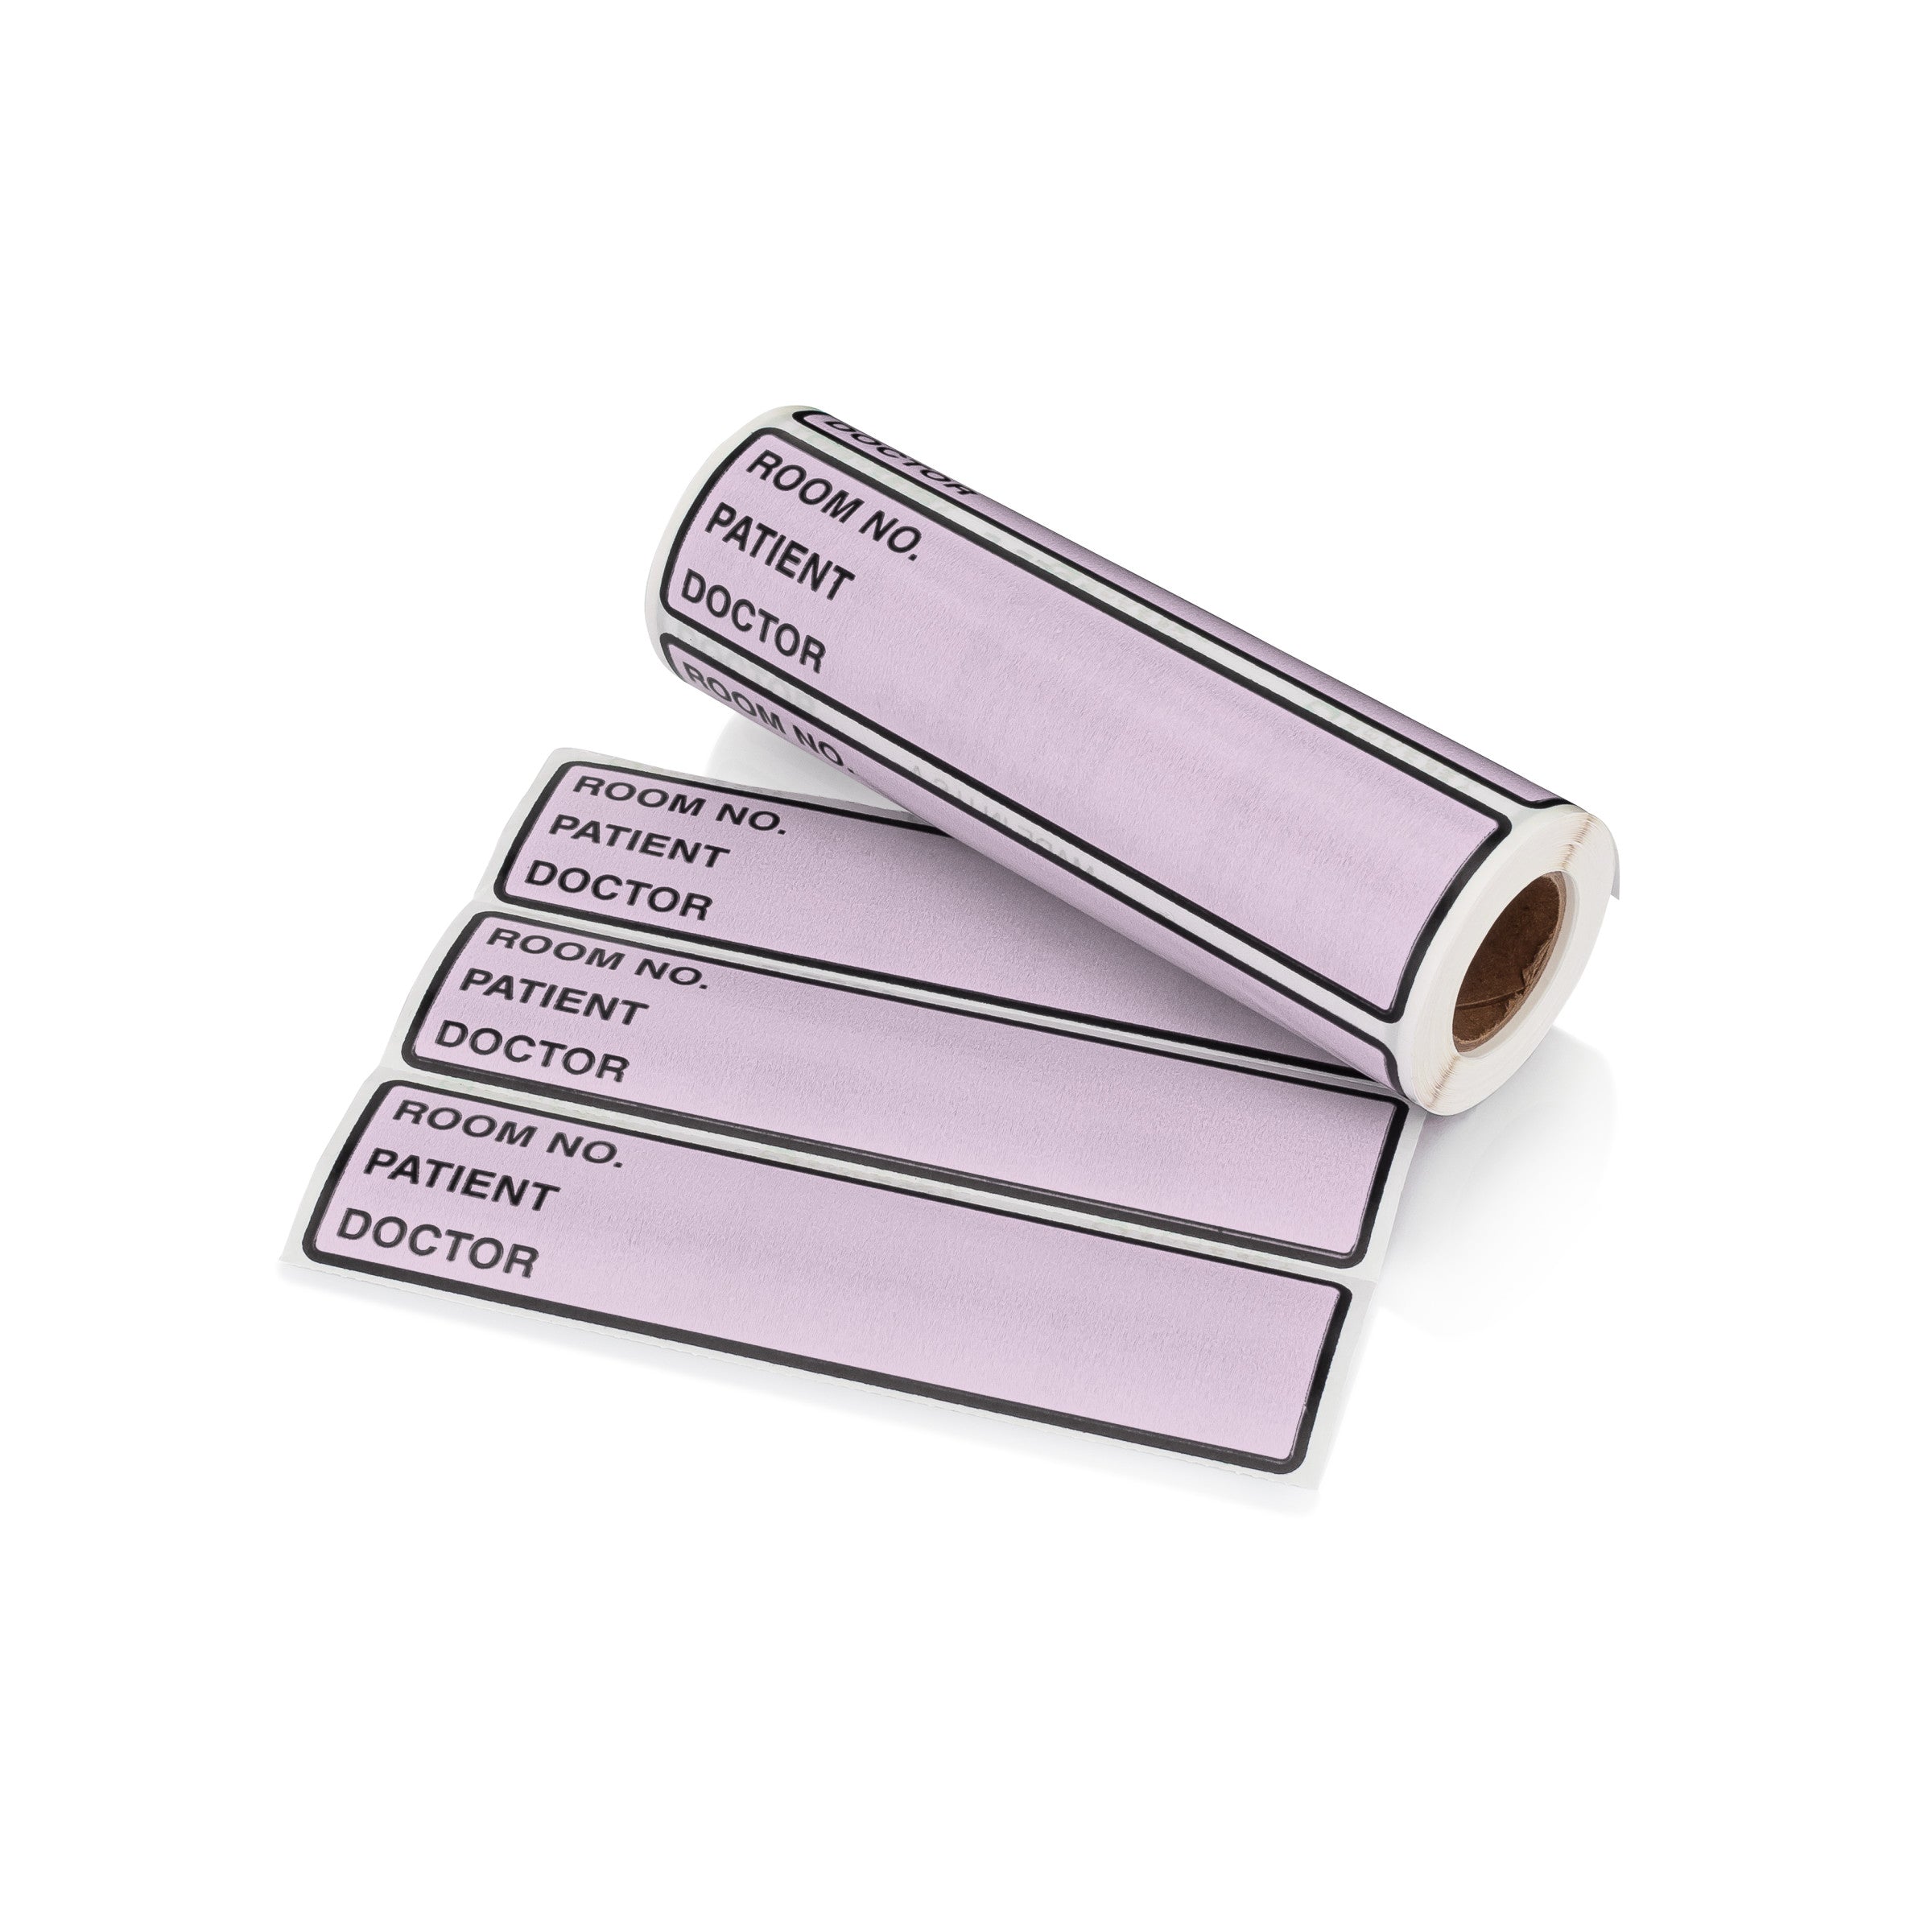 Room No. / Patient / Doctor Preprinted ID Labels for 1.5 – 4” Ring Binder Spines - Roll of 200